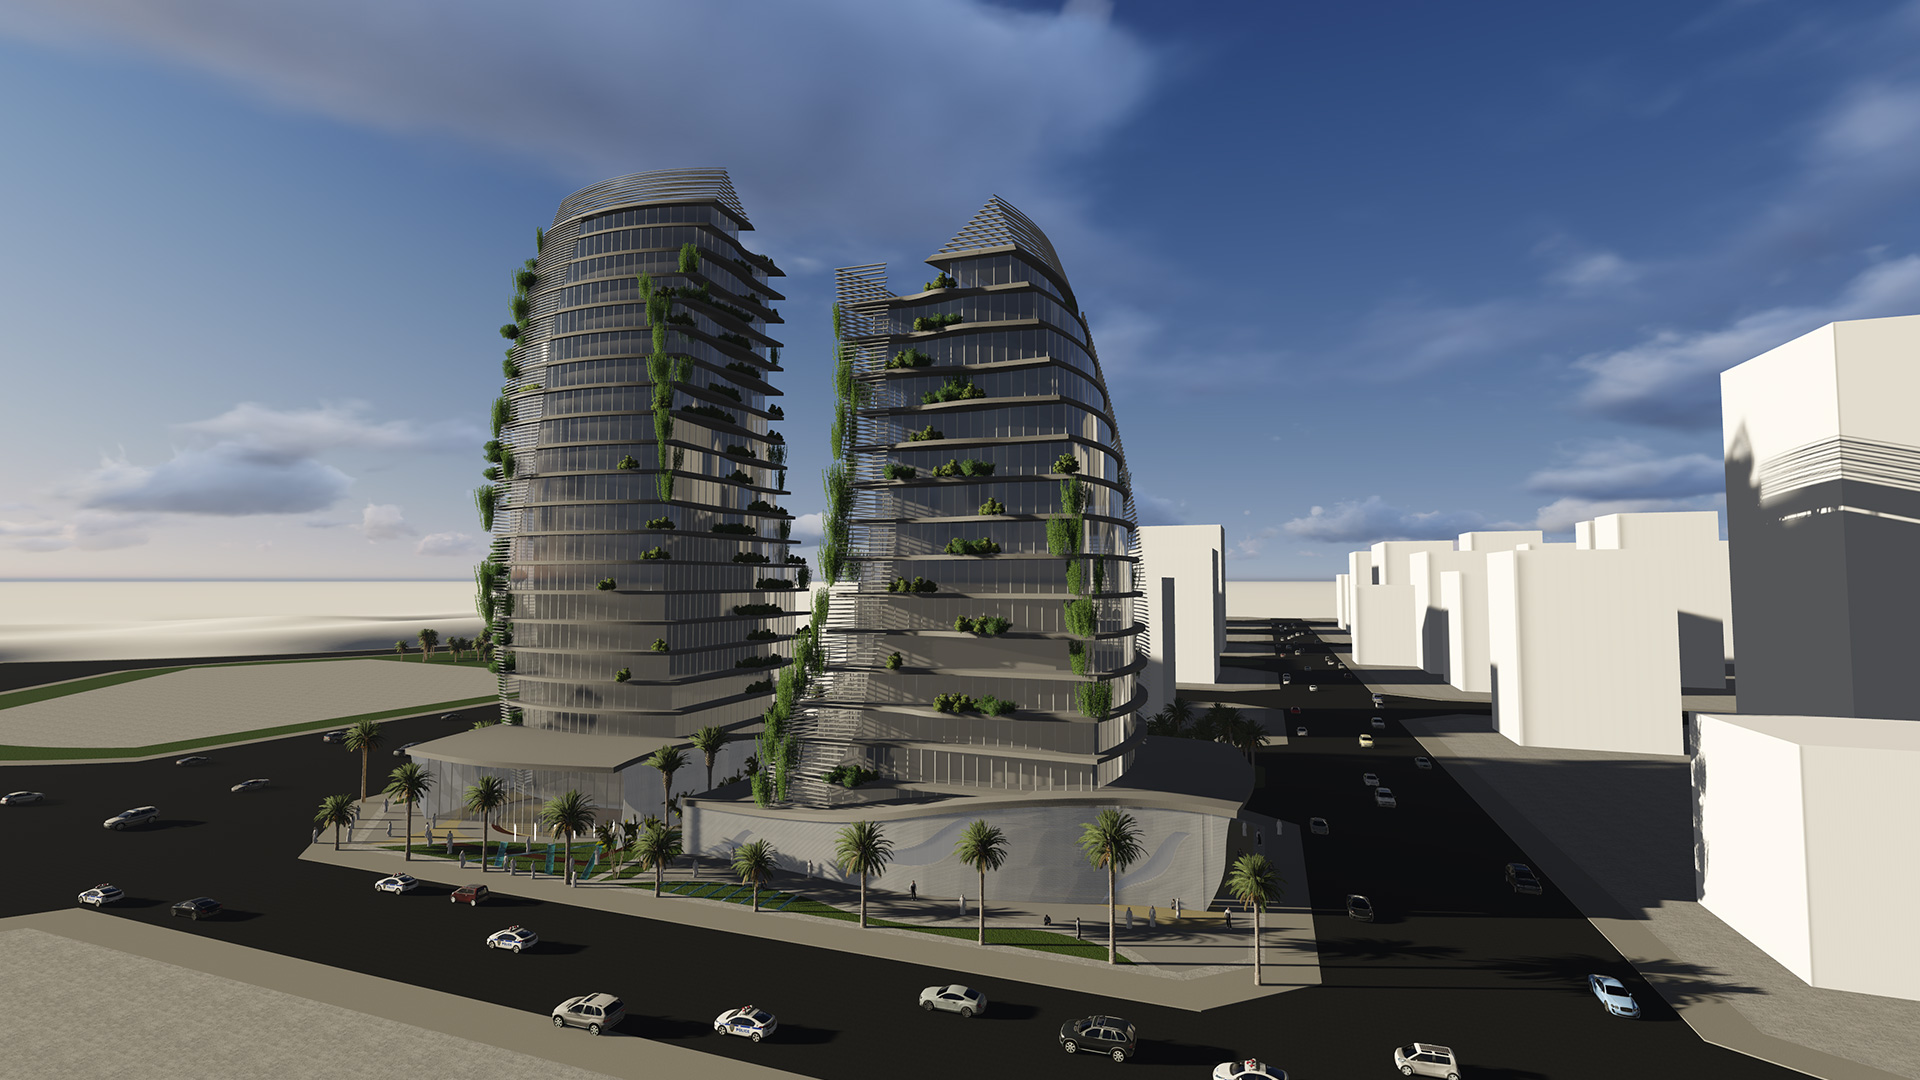 Al Kharaej Tower concept for shops - offices and residential in Qatar